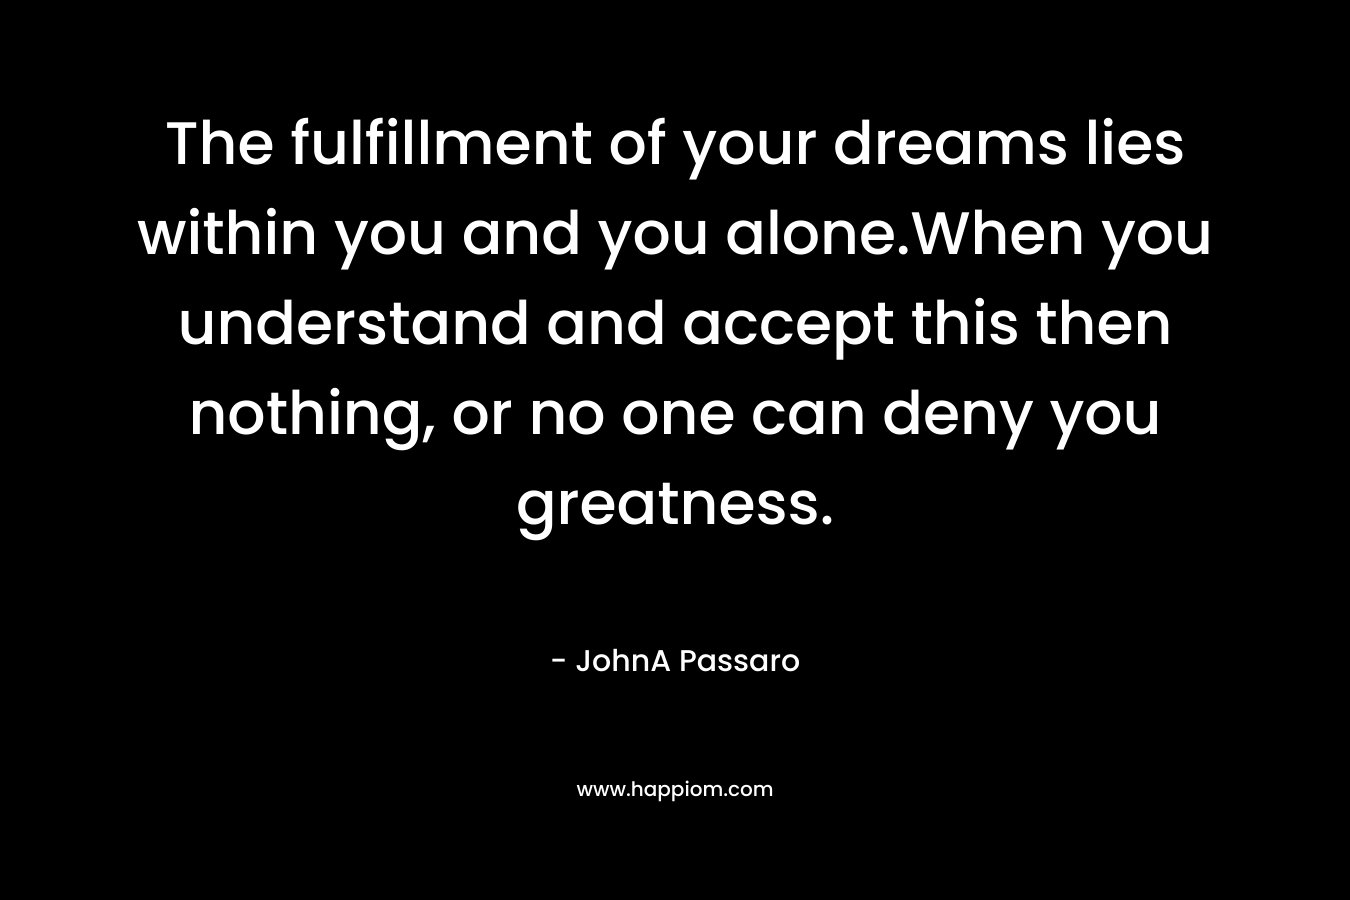 The fulfillment of your dreams lies within you and you alone.When you understand and accept this then nothing, or no one can deny you greatness.